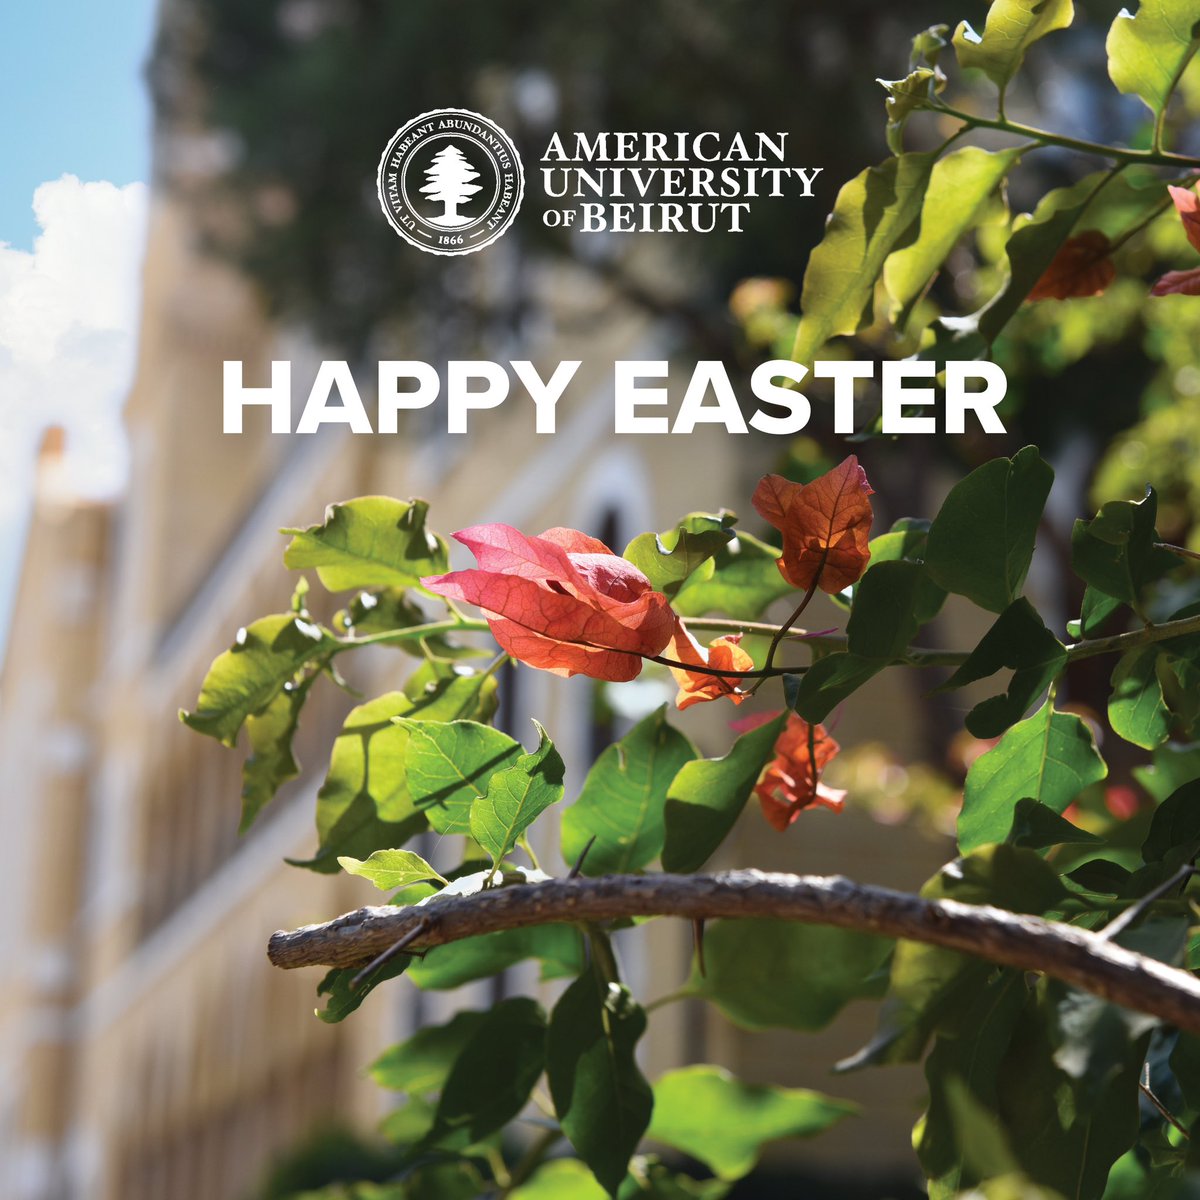 Sending warm Easter wishes from the heart of AUB! May your day be as bright and beautiful as the blooming flowers on our campus. 🌷